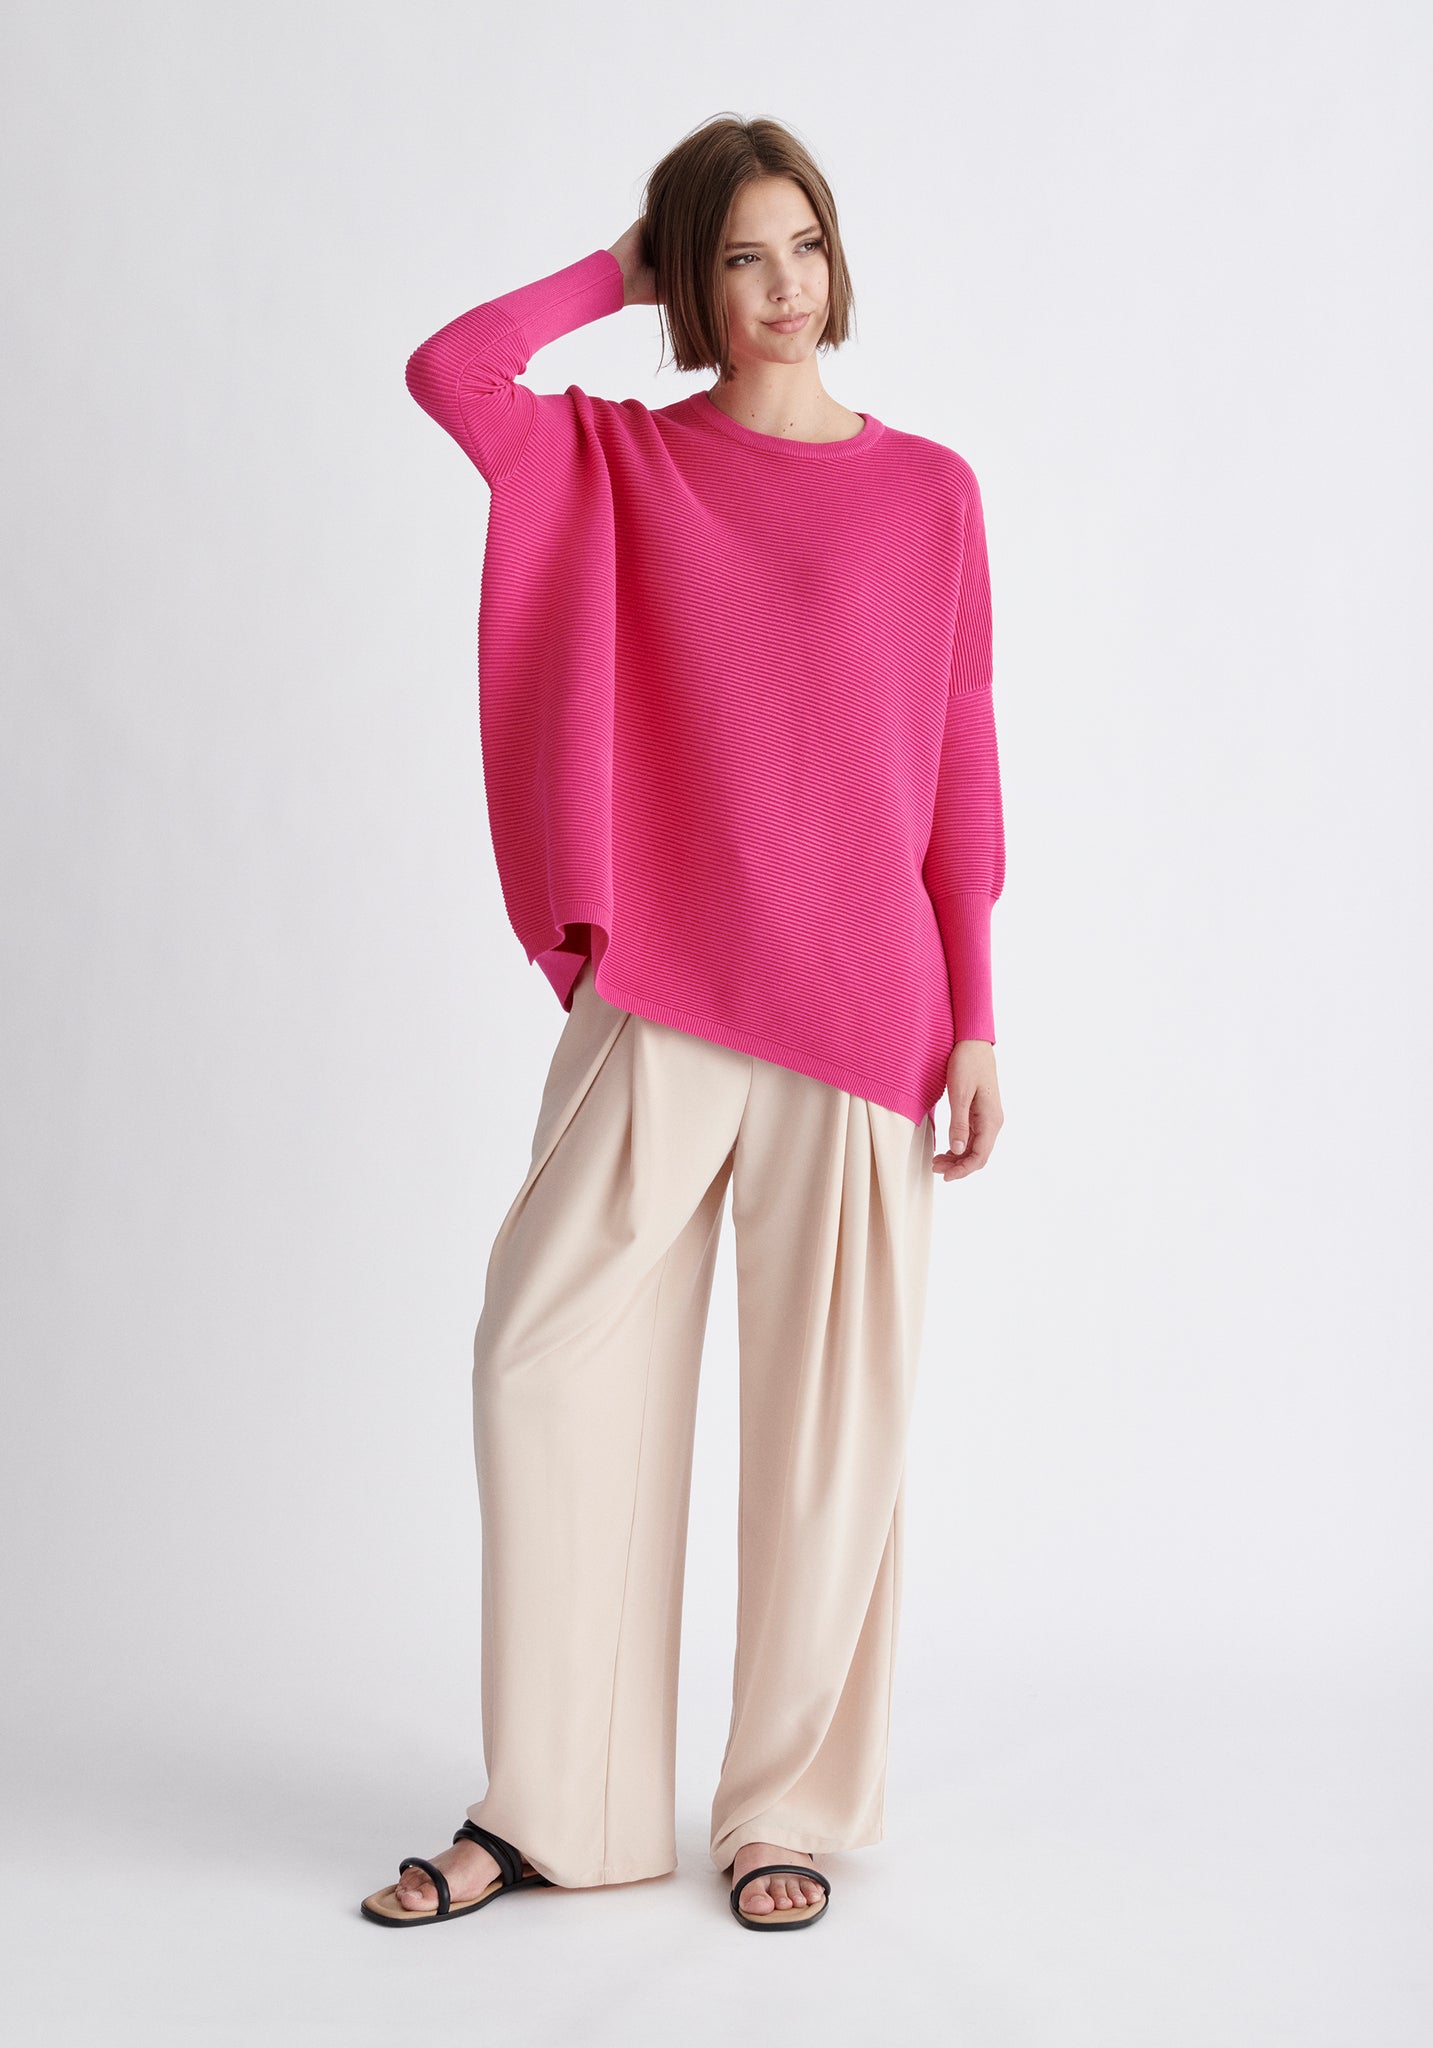 Paisie Ribbed Oversized Knit Jumper in Hot Pink | Knitwear | Paisie